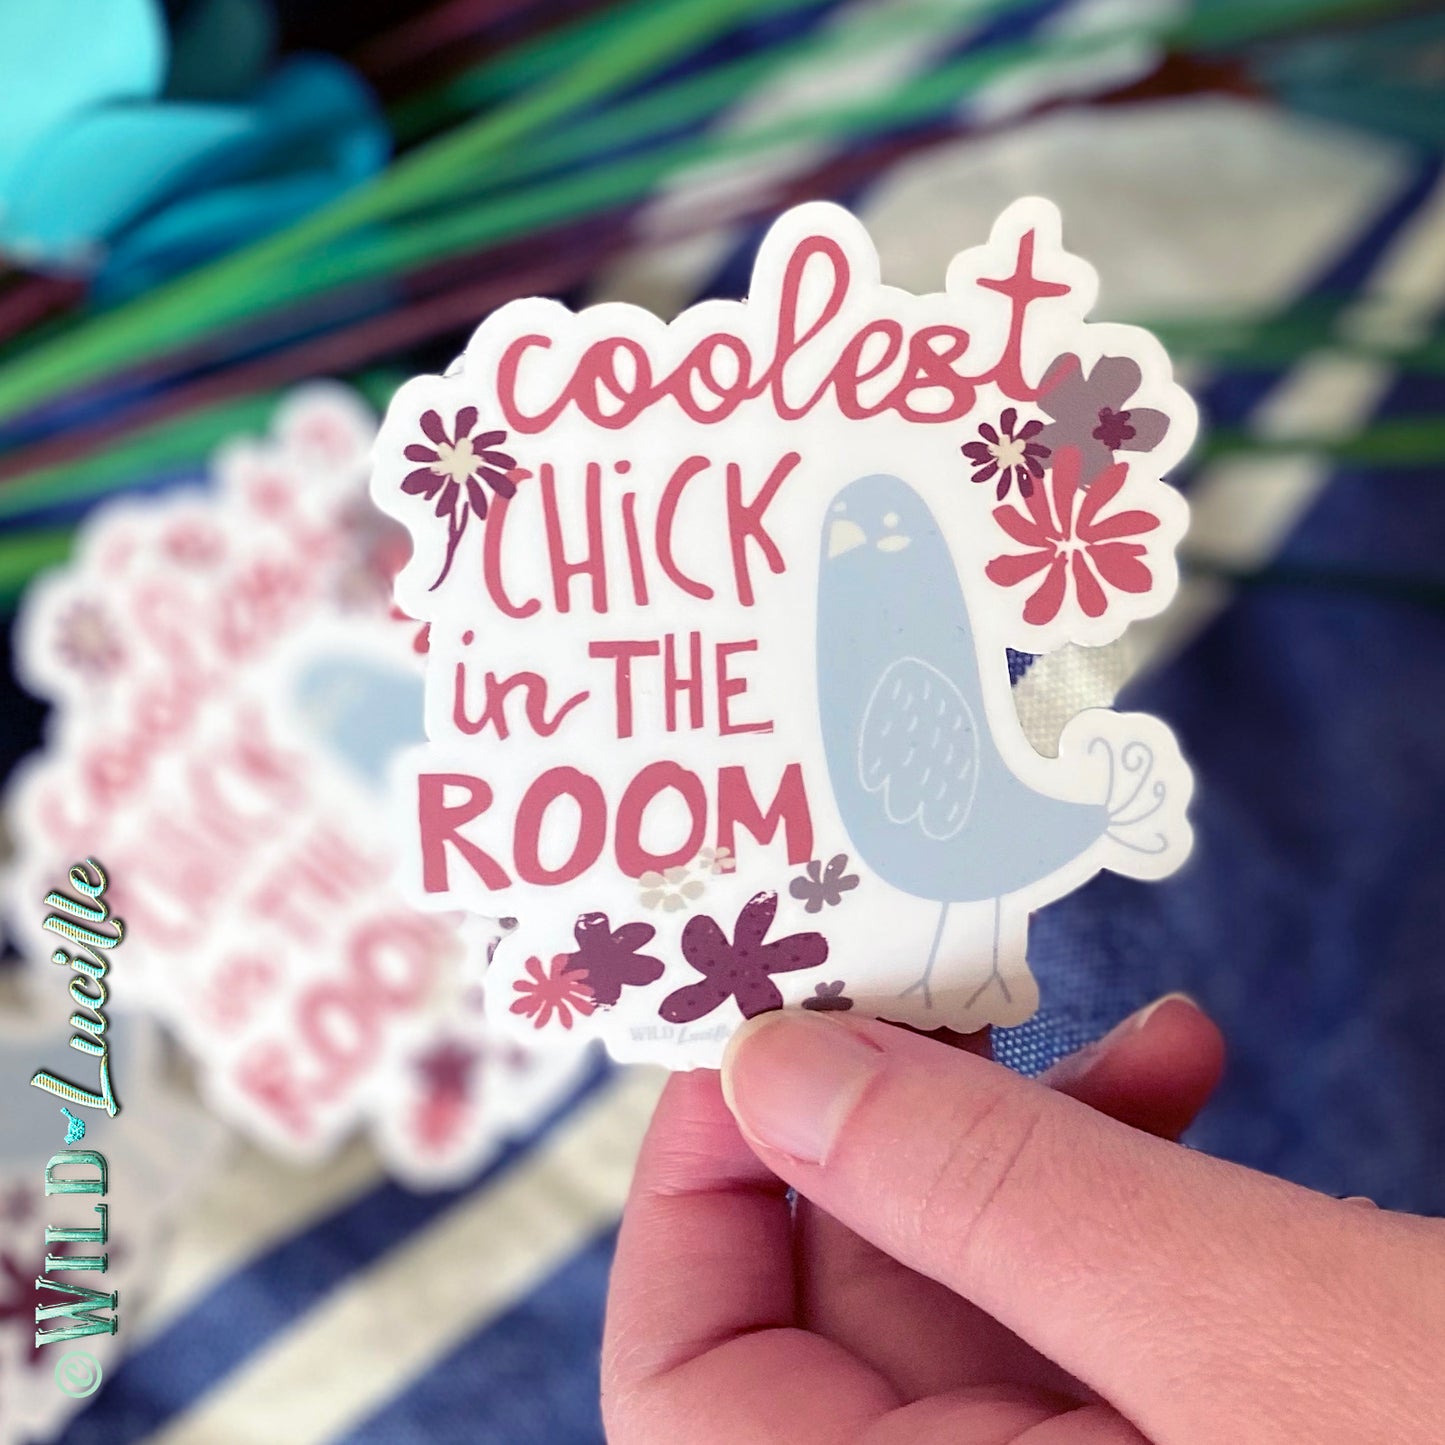 Coolest Chick in The Room - Vinyl Chicken Decal